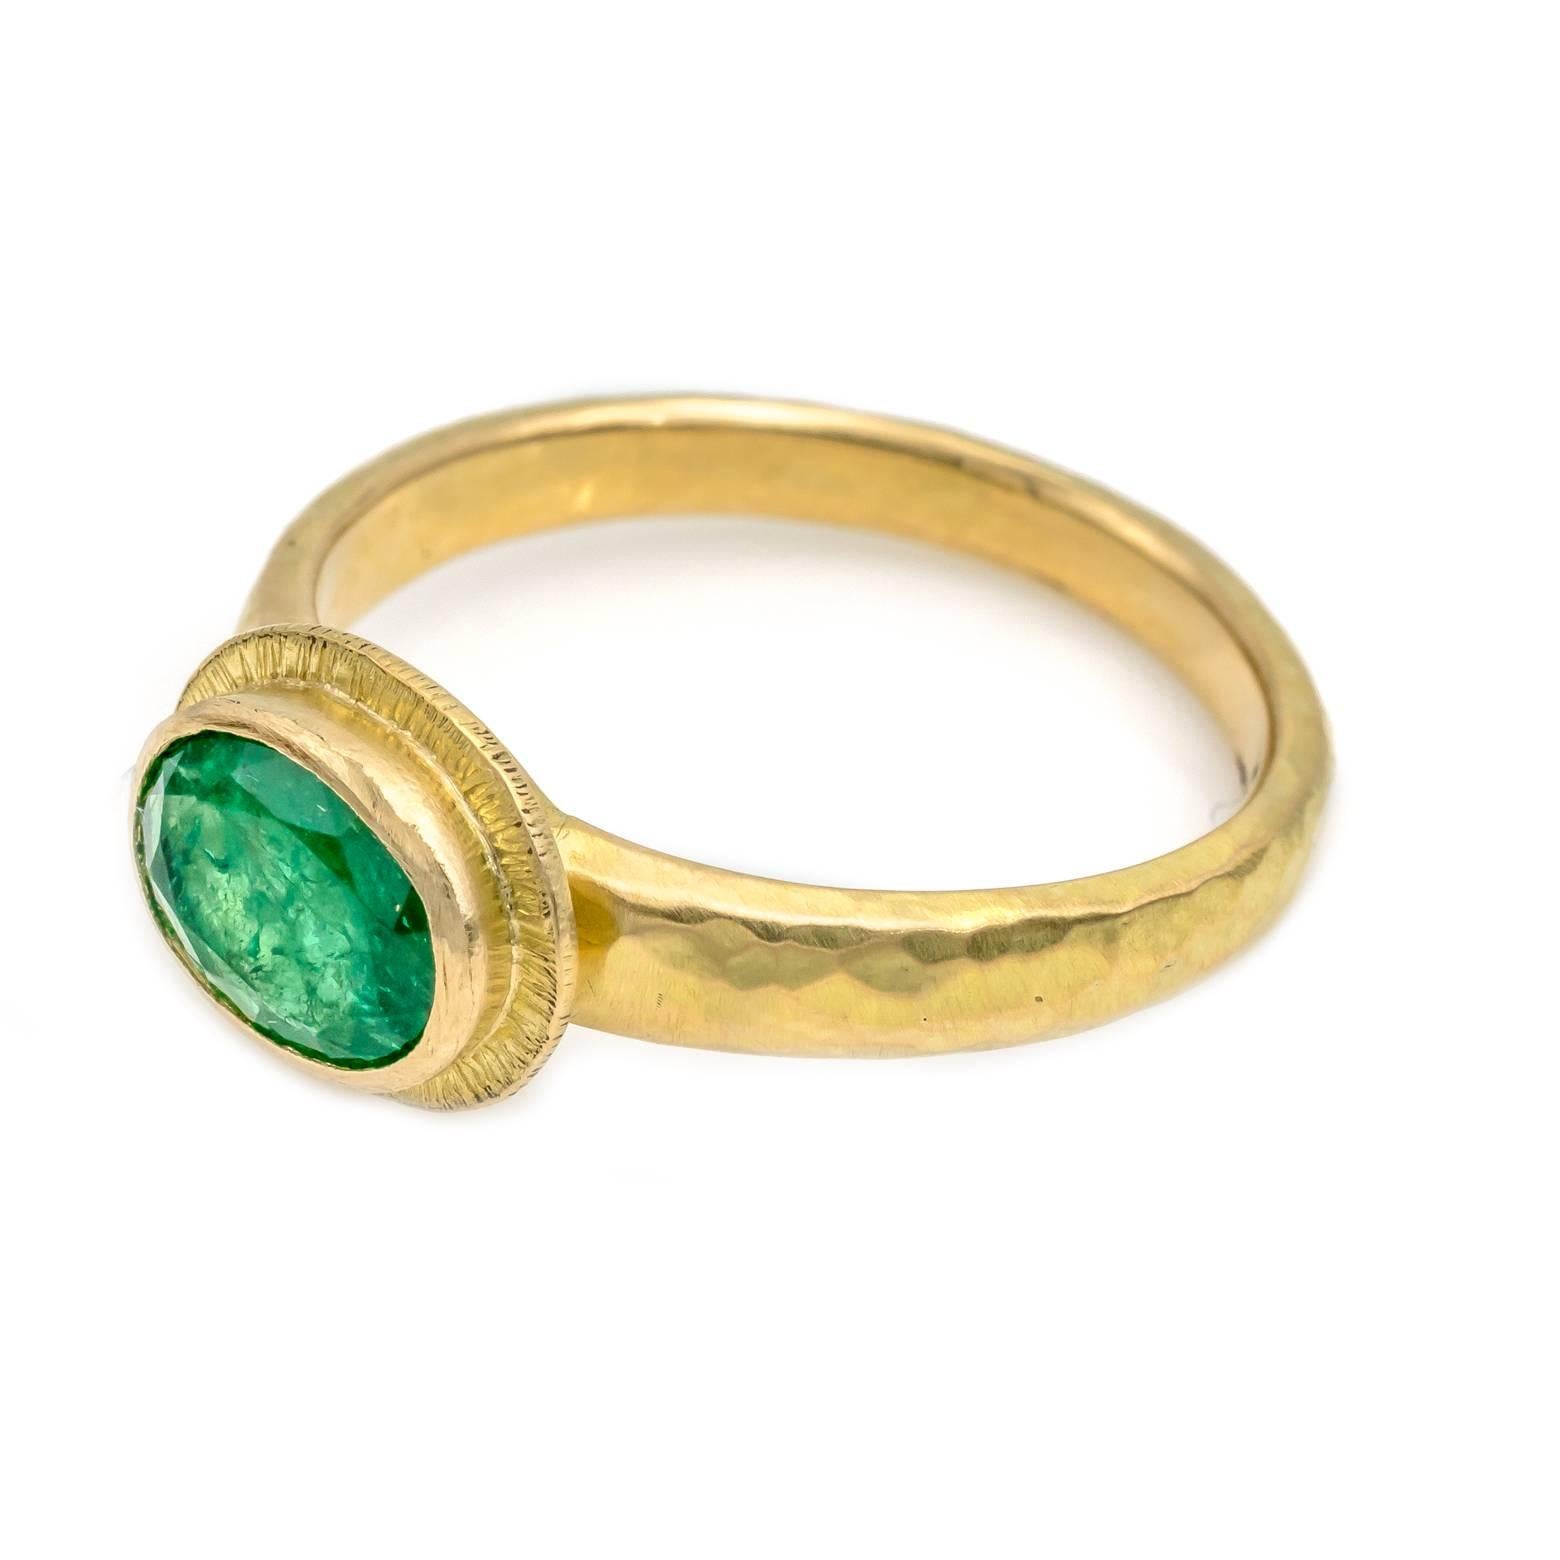 Contemporary Oval Emerald Ring in 18 Karat Yellow Gold, Hammered and Textured, 0.90 Carat